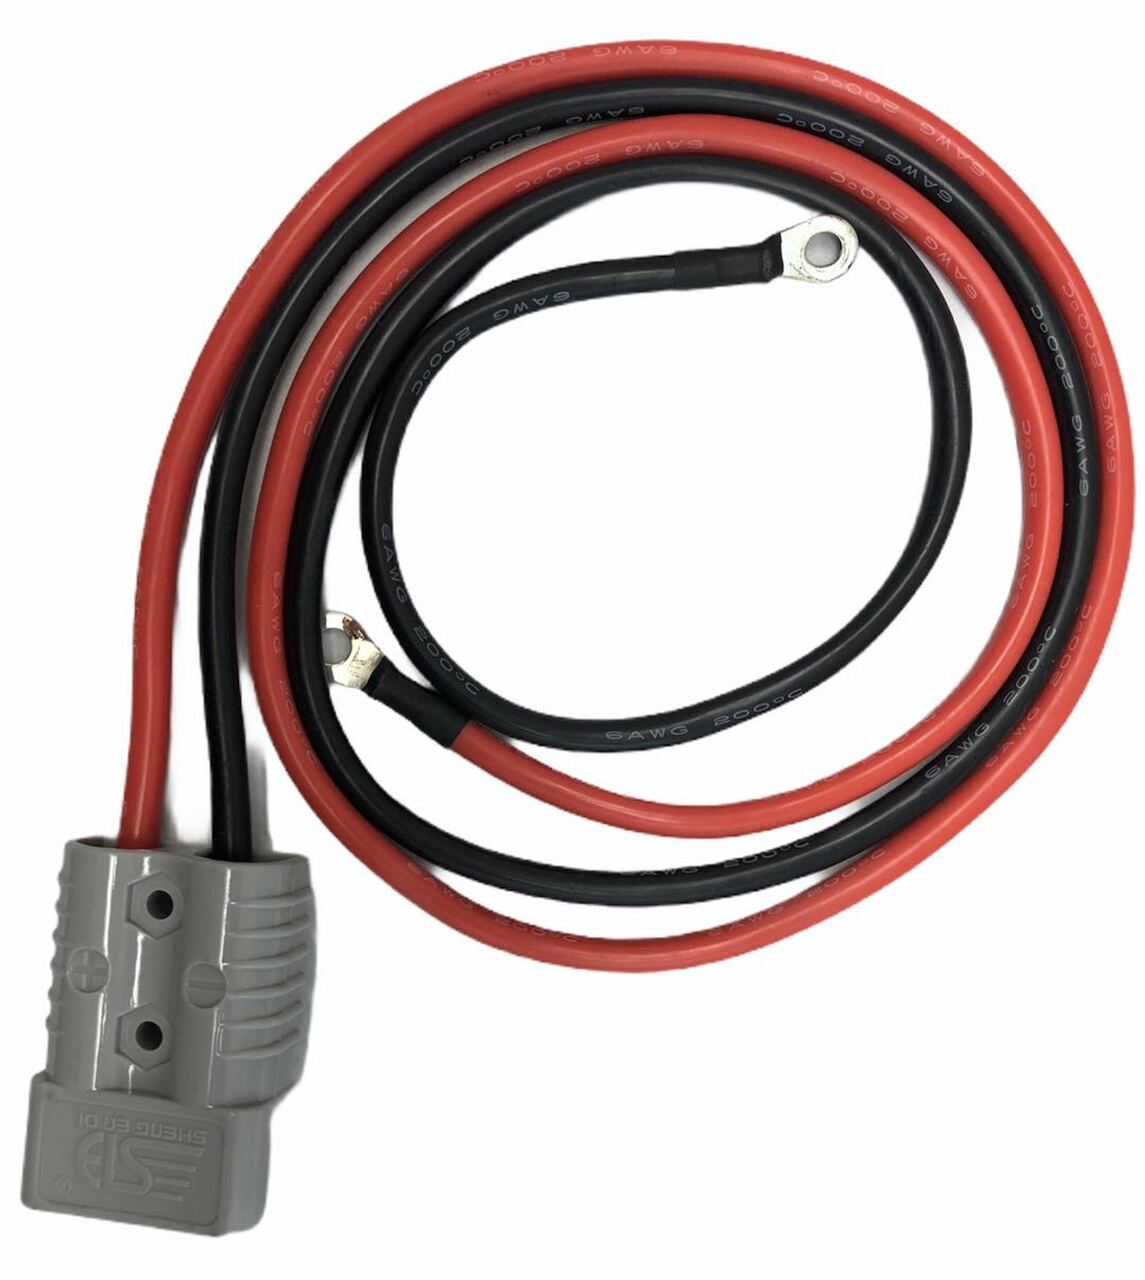 Turbo Energy 5.1 Cable Kit 